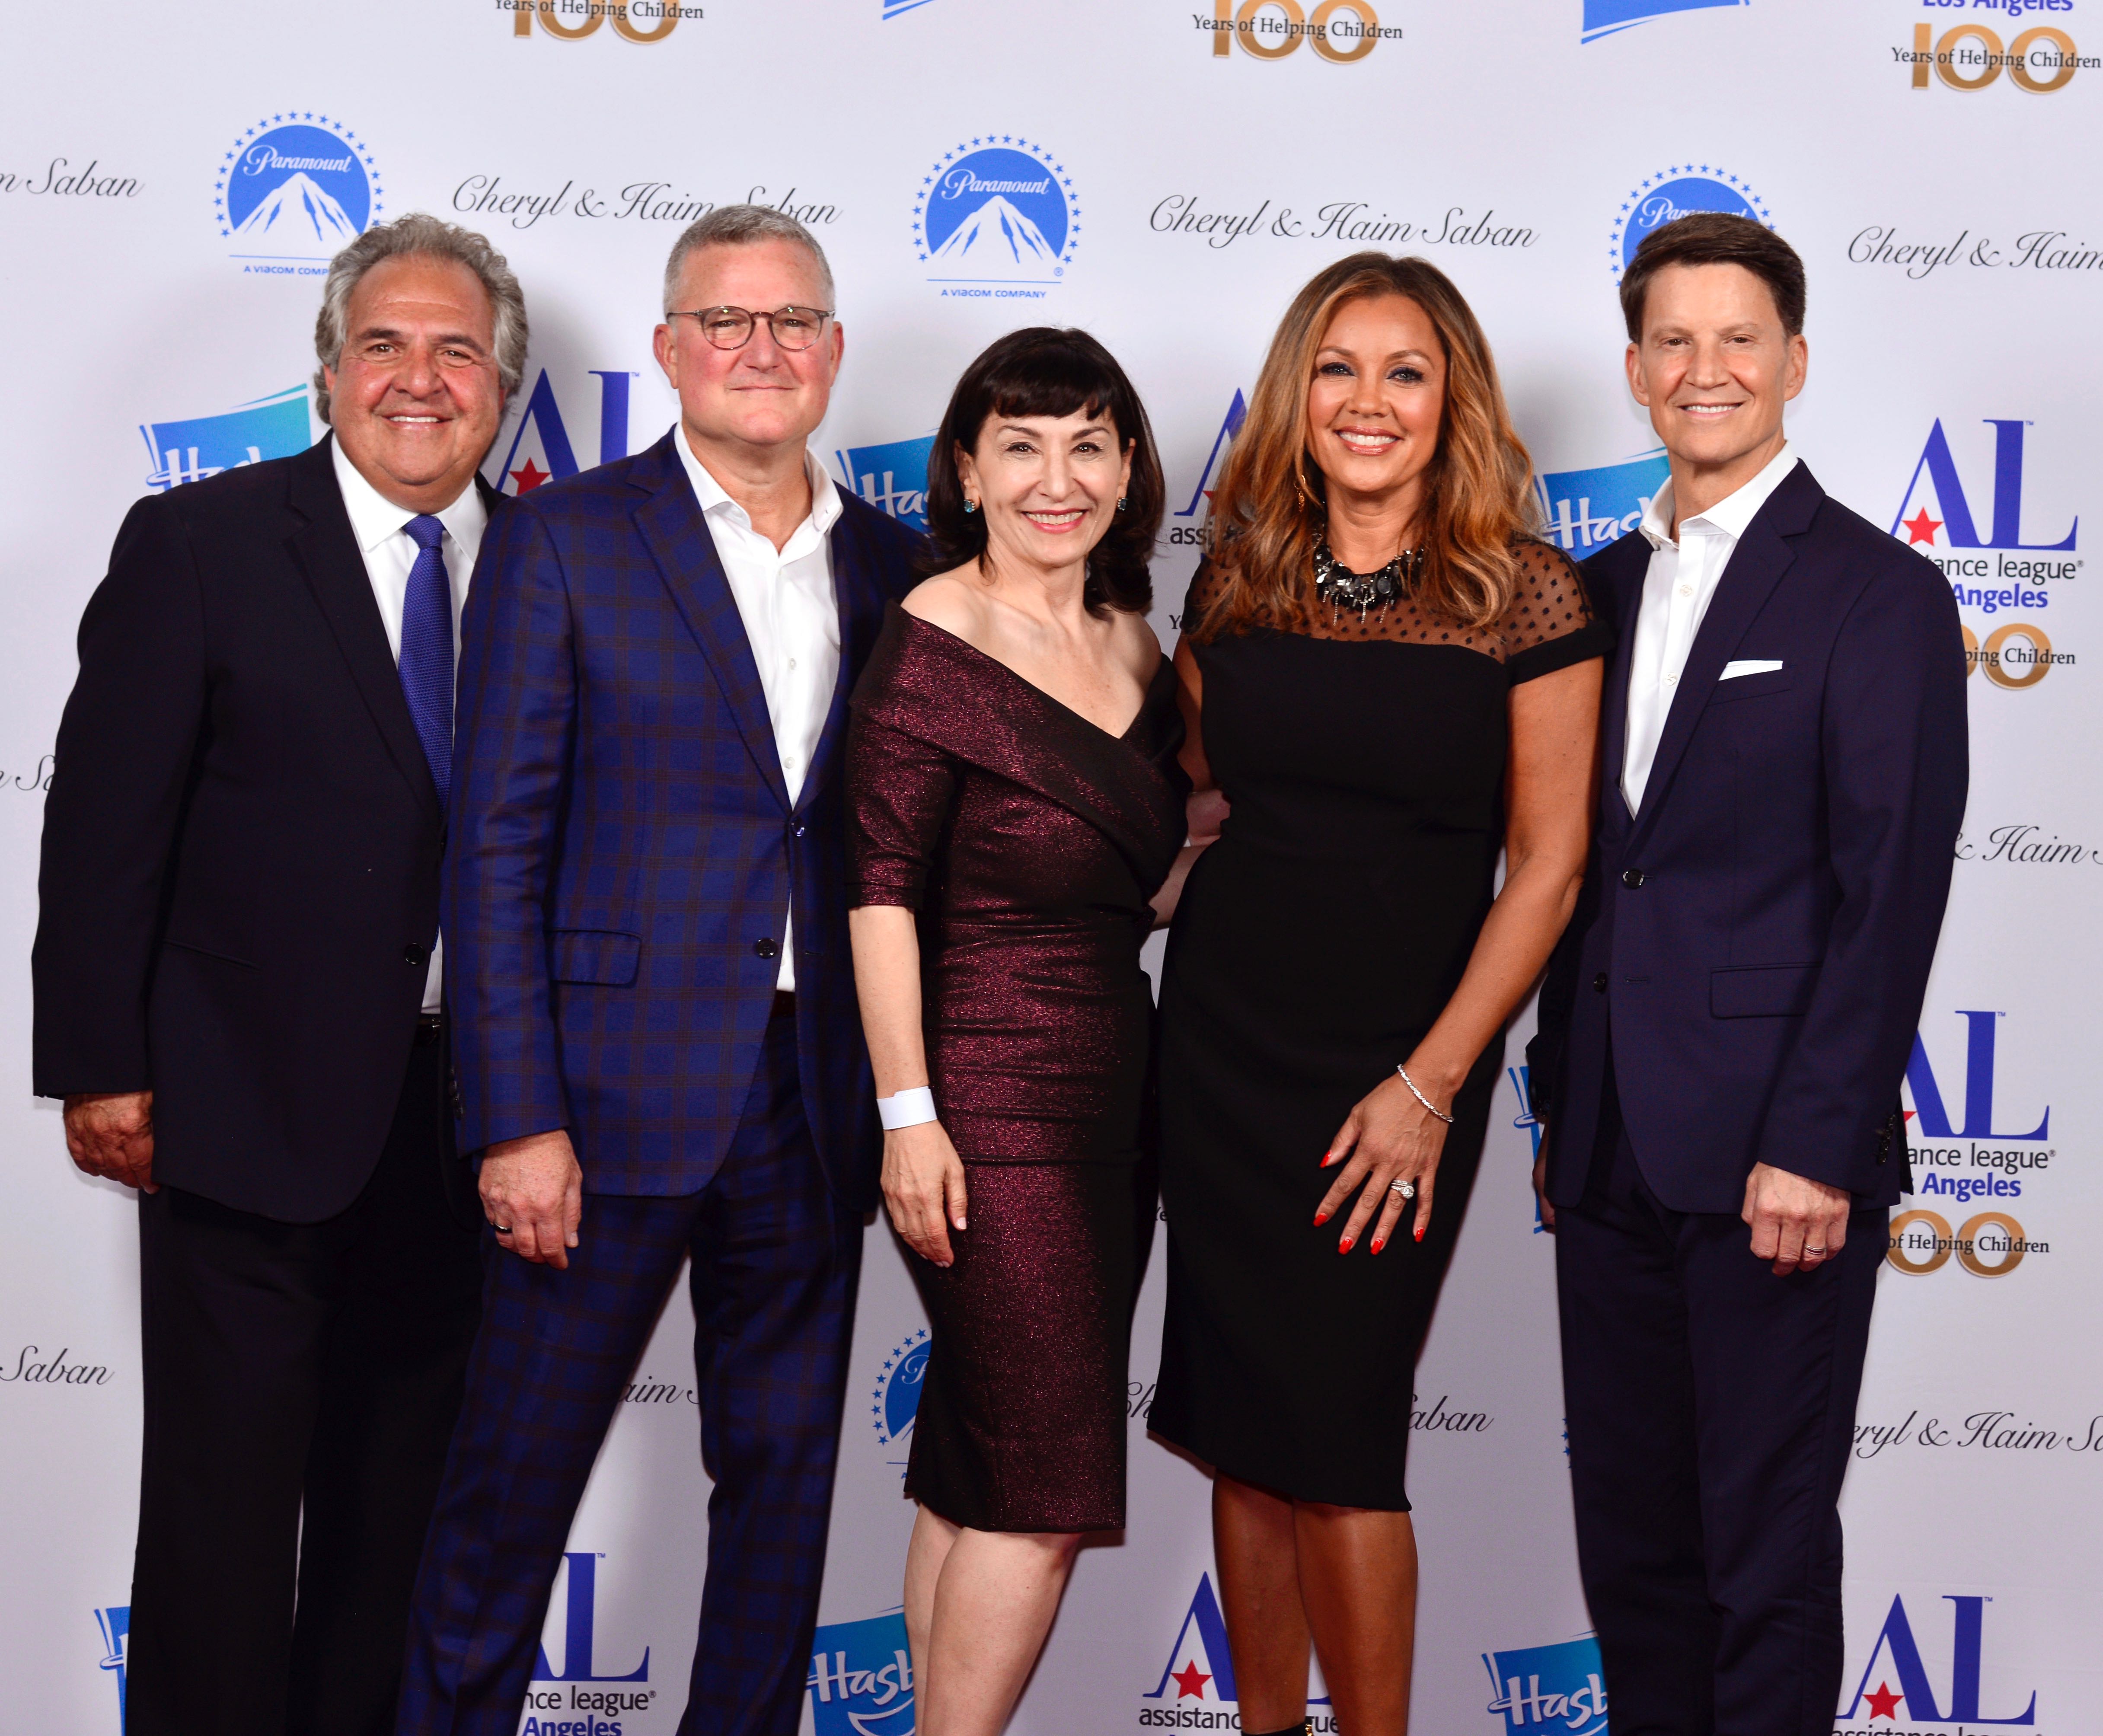 Celebrating 100 Years of Assistance League of Los Angeles: Jim Gianopulos, Chairman and CEO, Paramount Pictures; Steve Davis, Chief Content Office, Hasbro; Melanie Merians, CEO, Assistance League